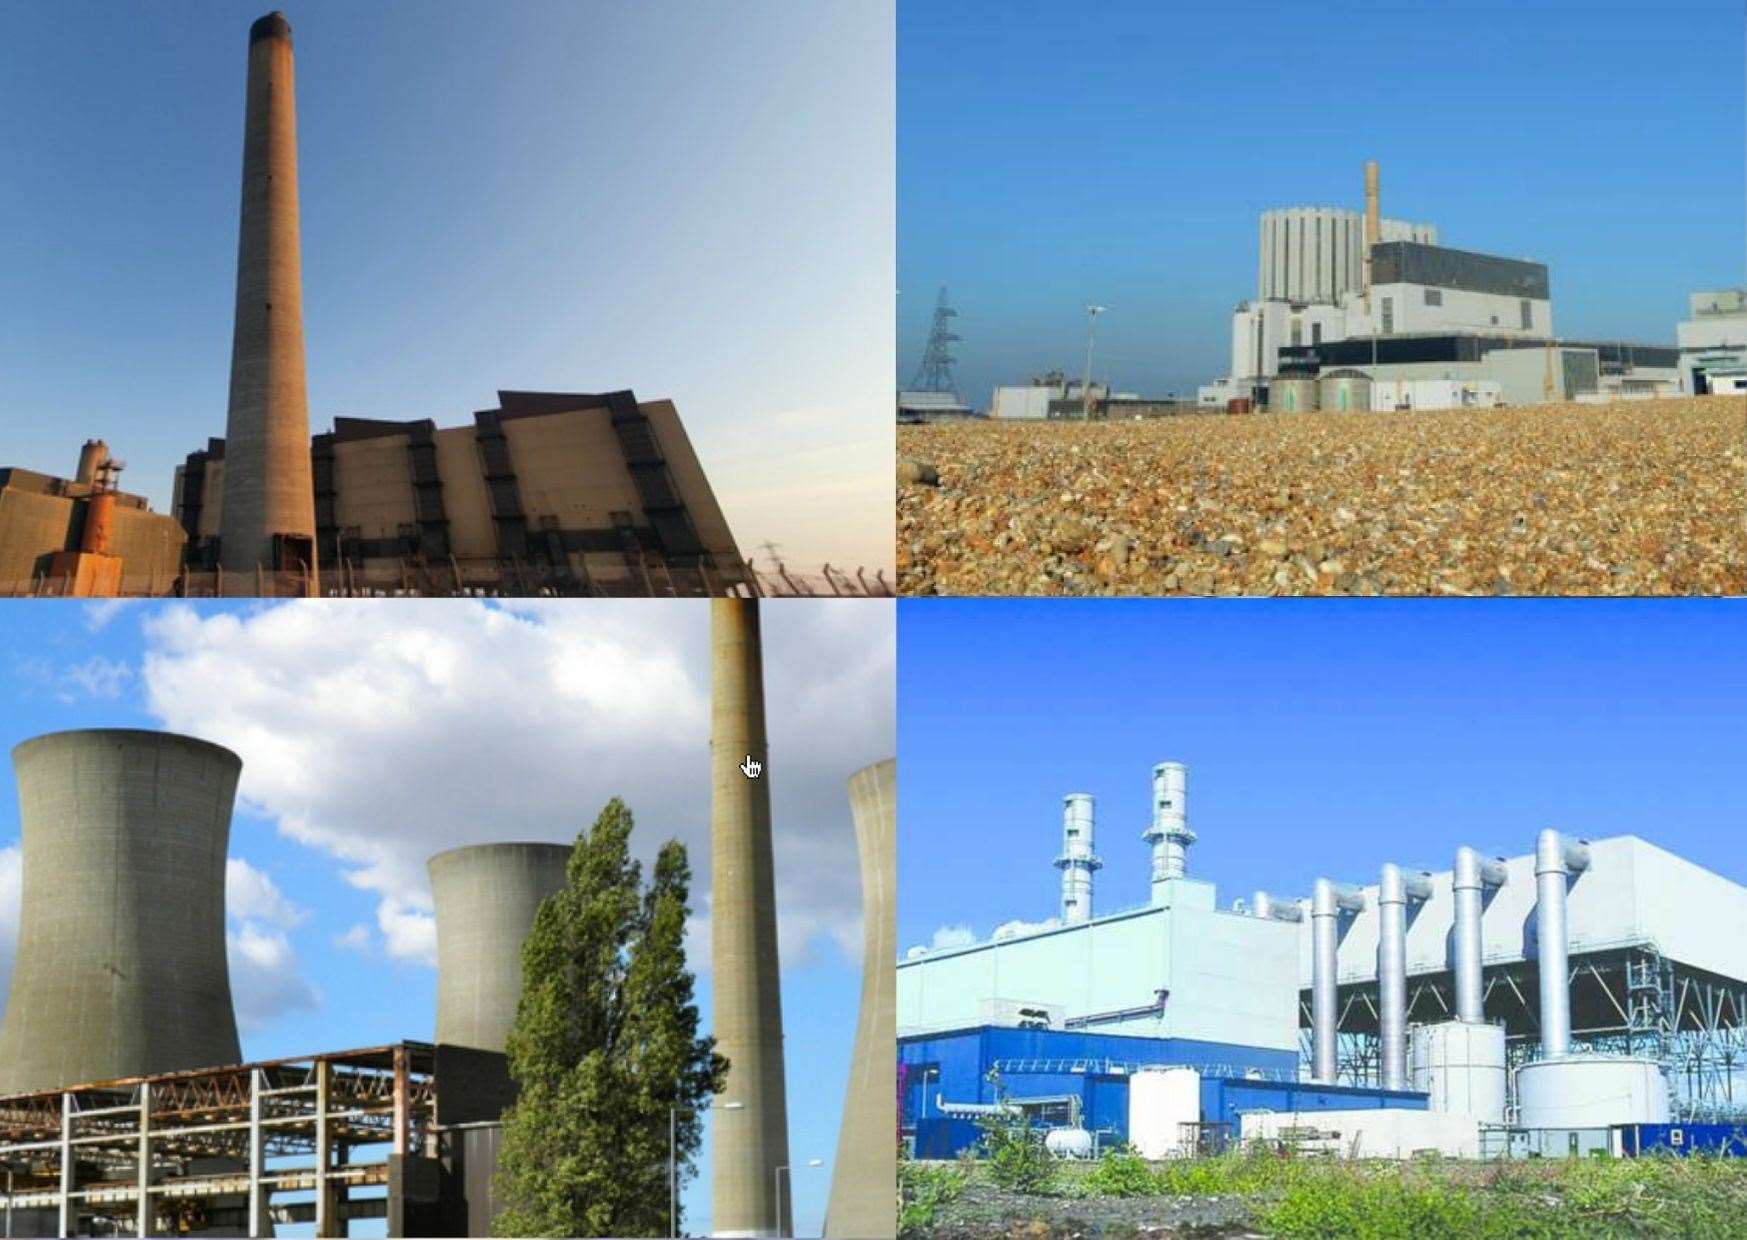 Kent has had its fair share of power stations, from coil and oil to nuclear